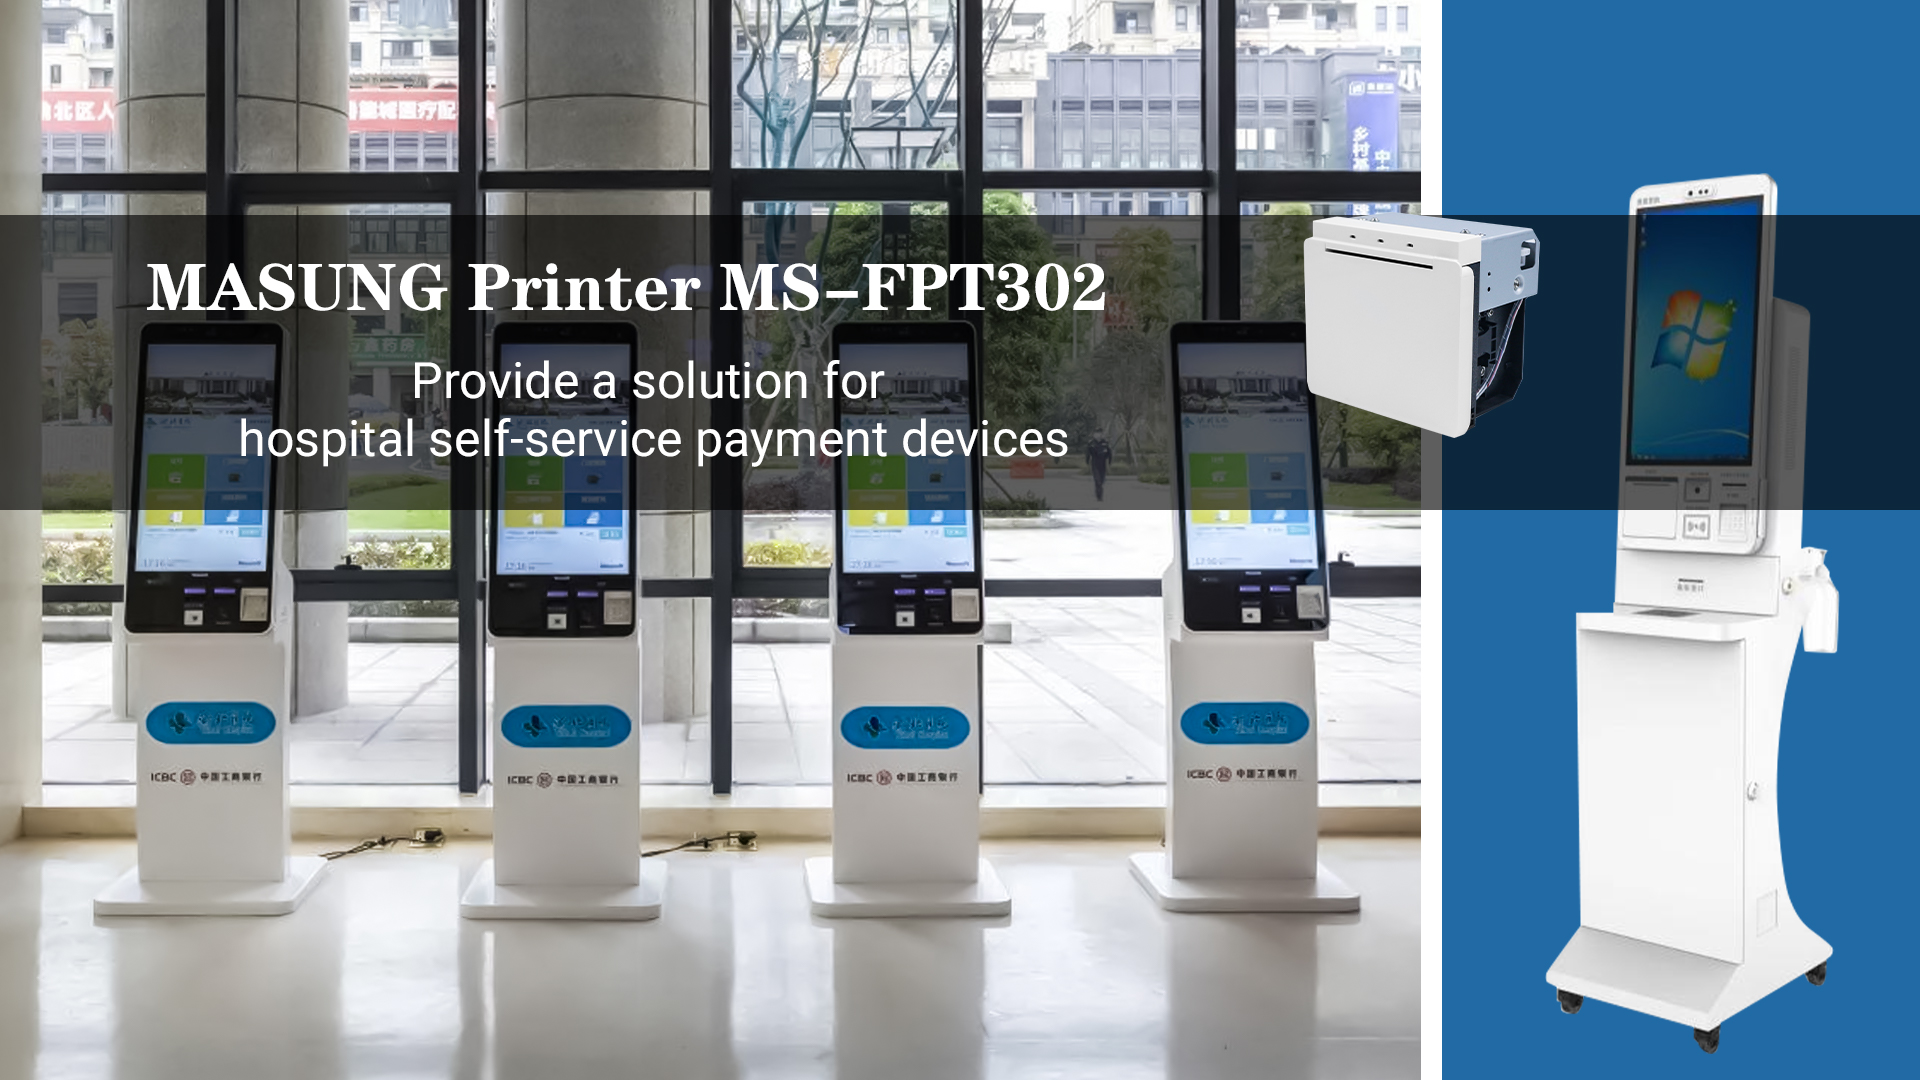 MASUNG printer MS-FPT302 provides solutions for hospital self-service payment equipment